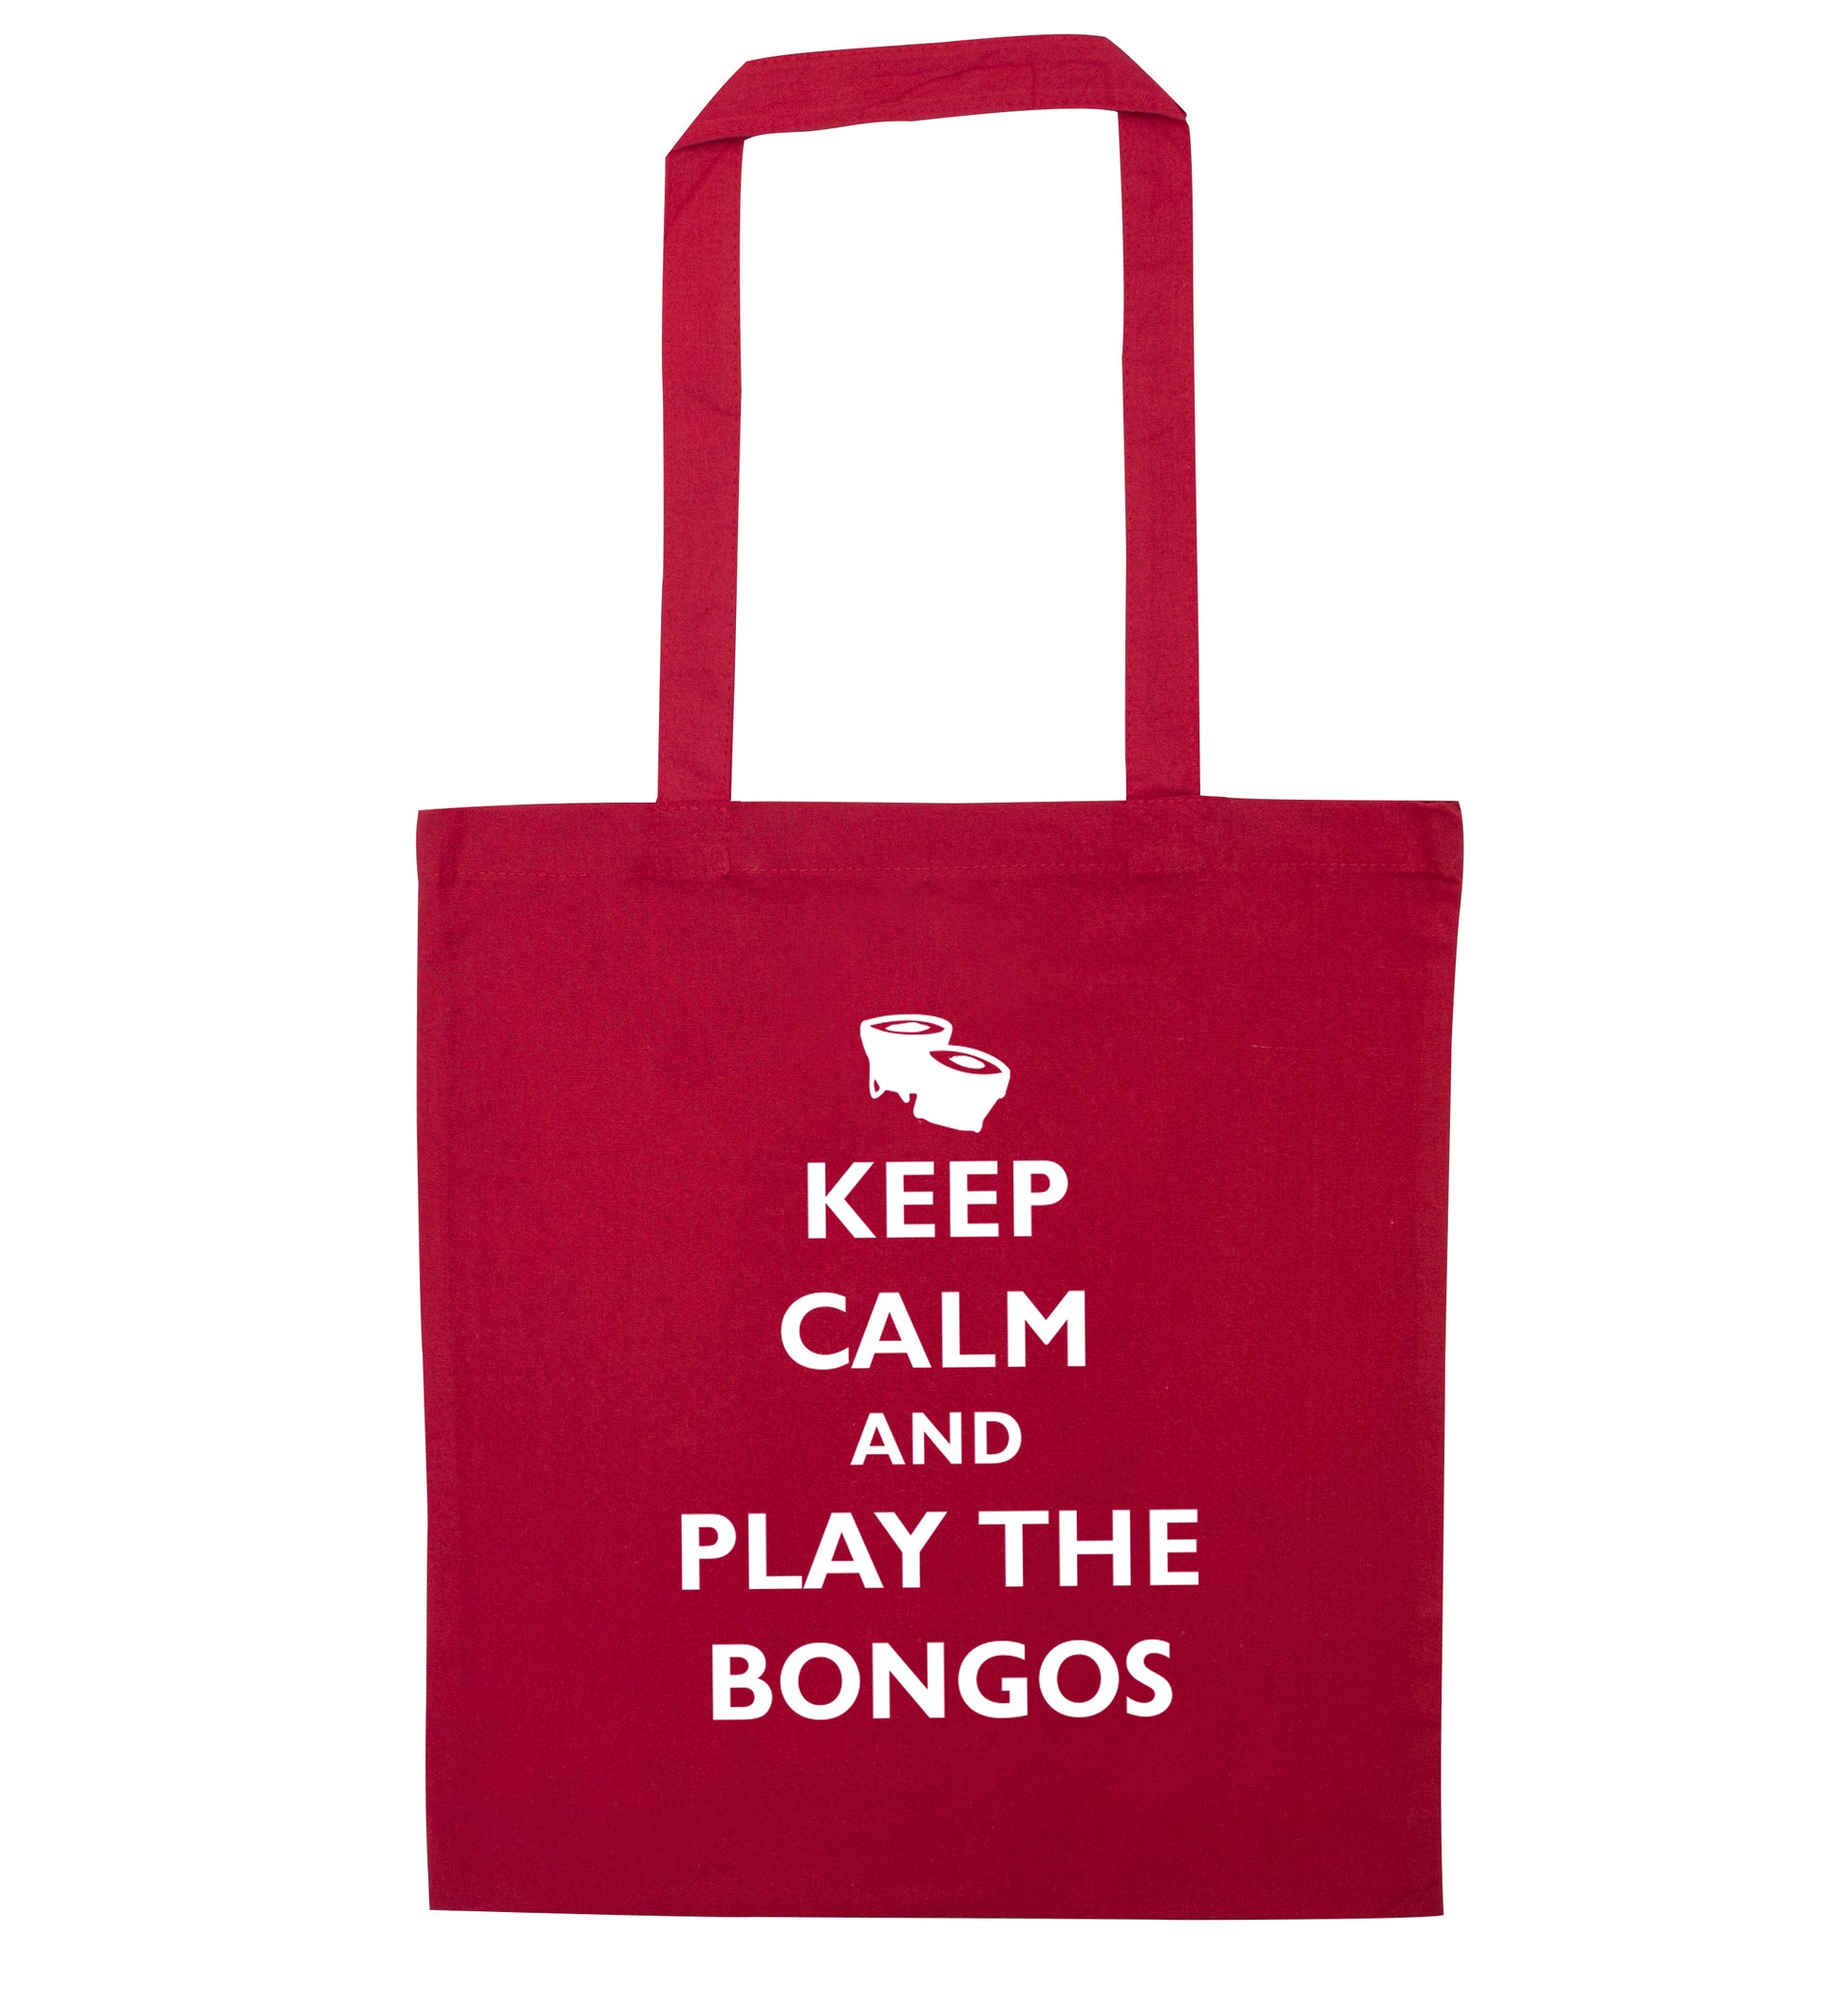 Keep calm and play the bongos red tote bag